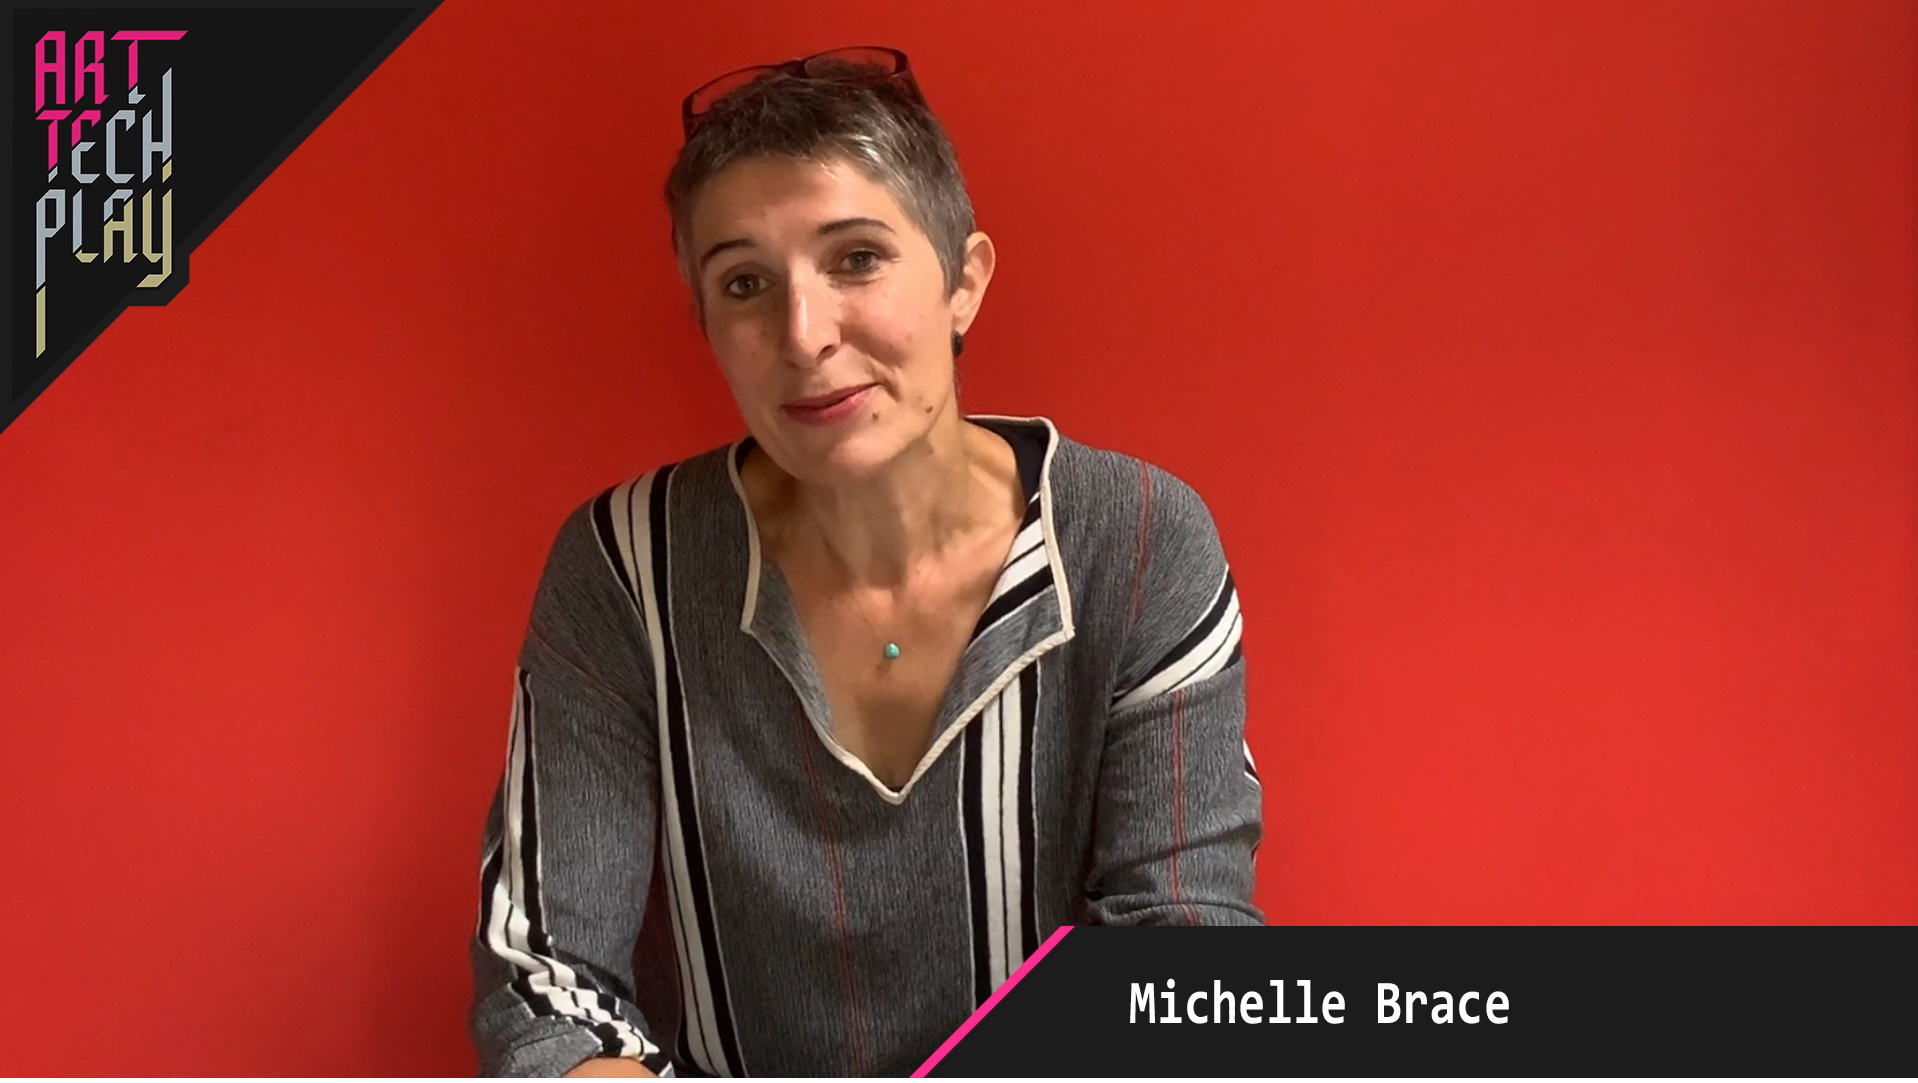 Michelle Brace on visual mixing